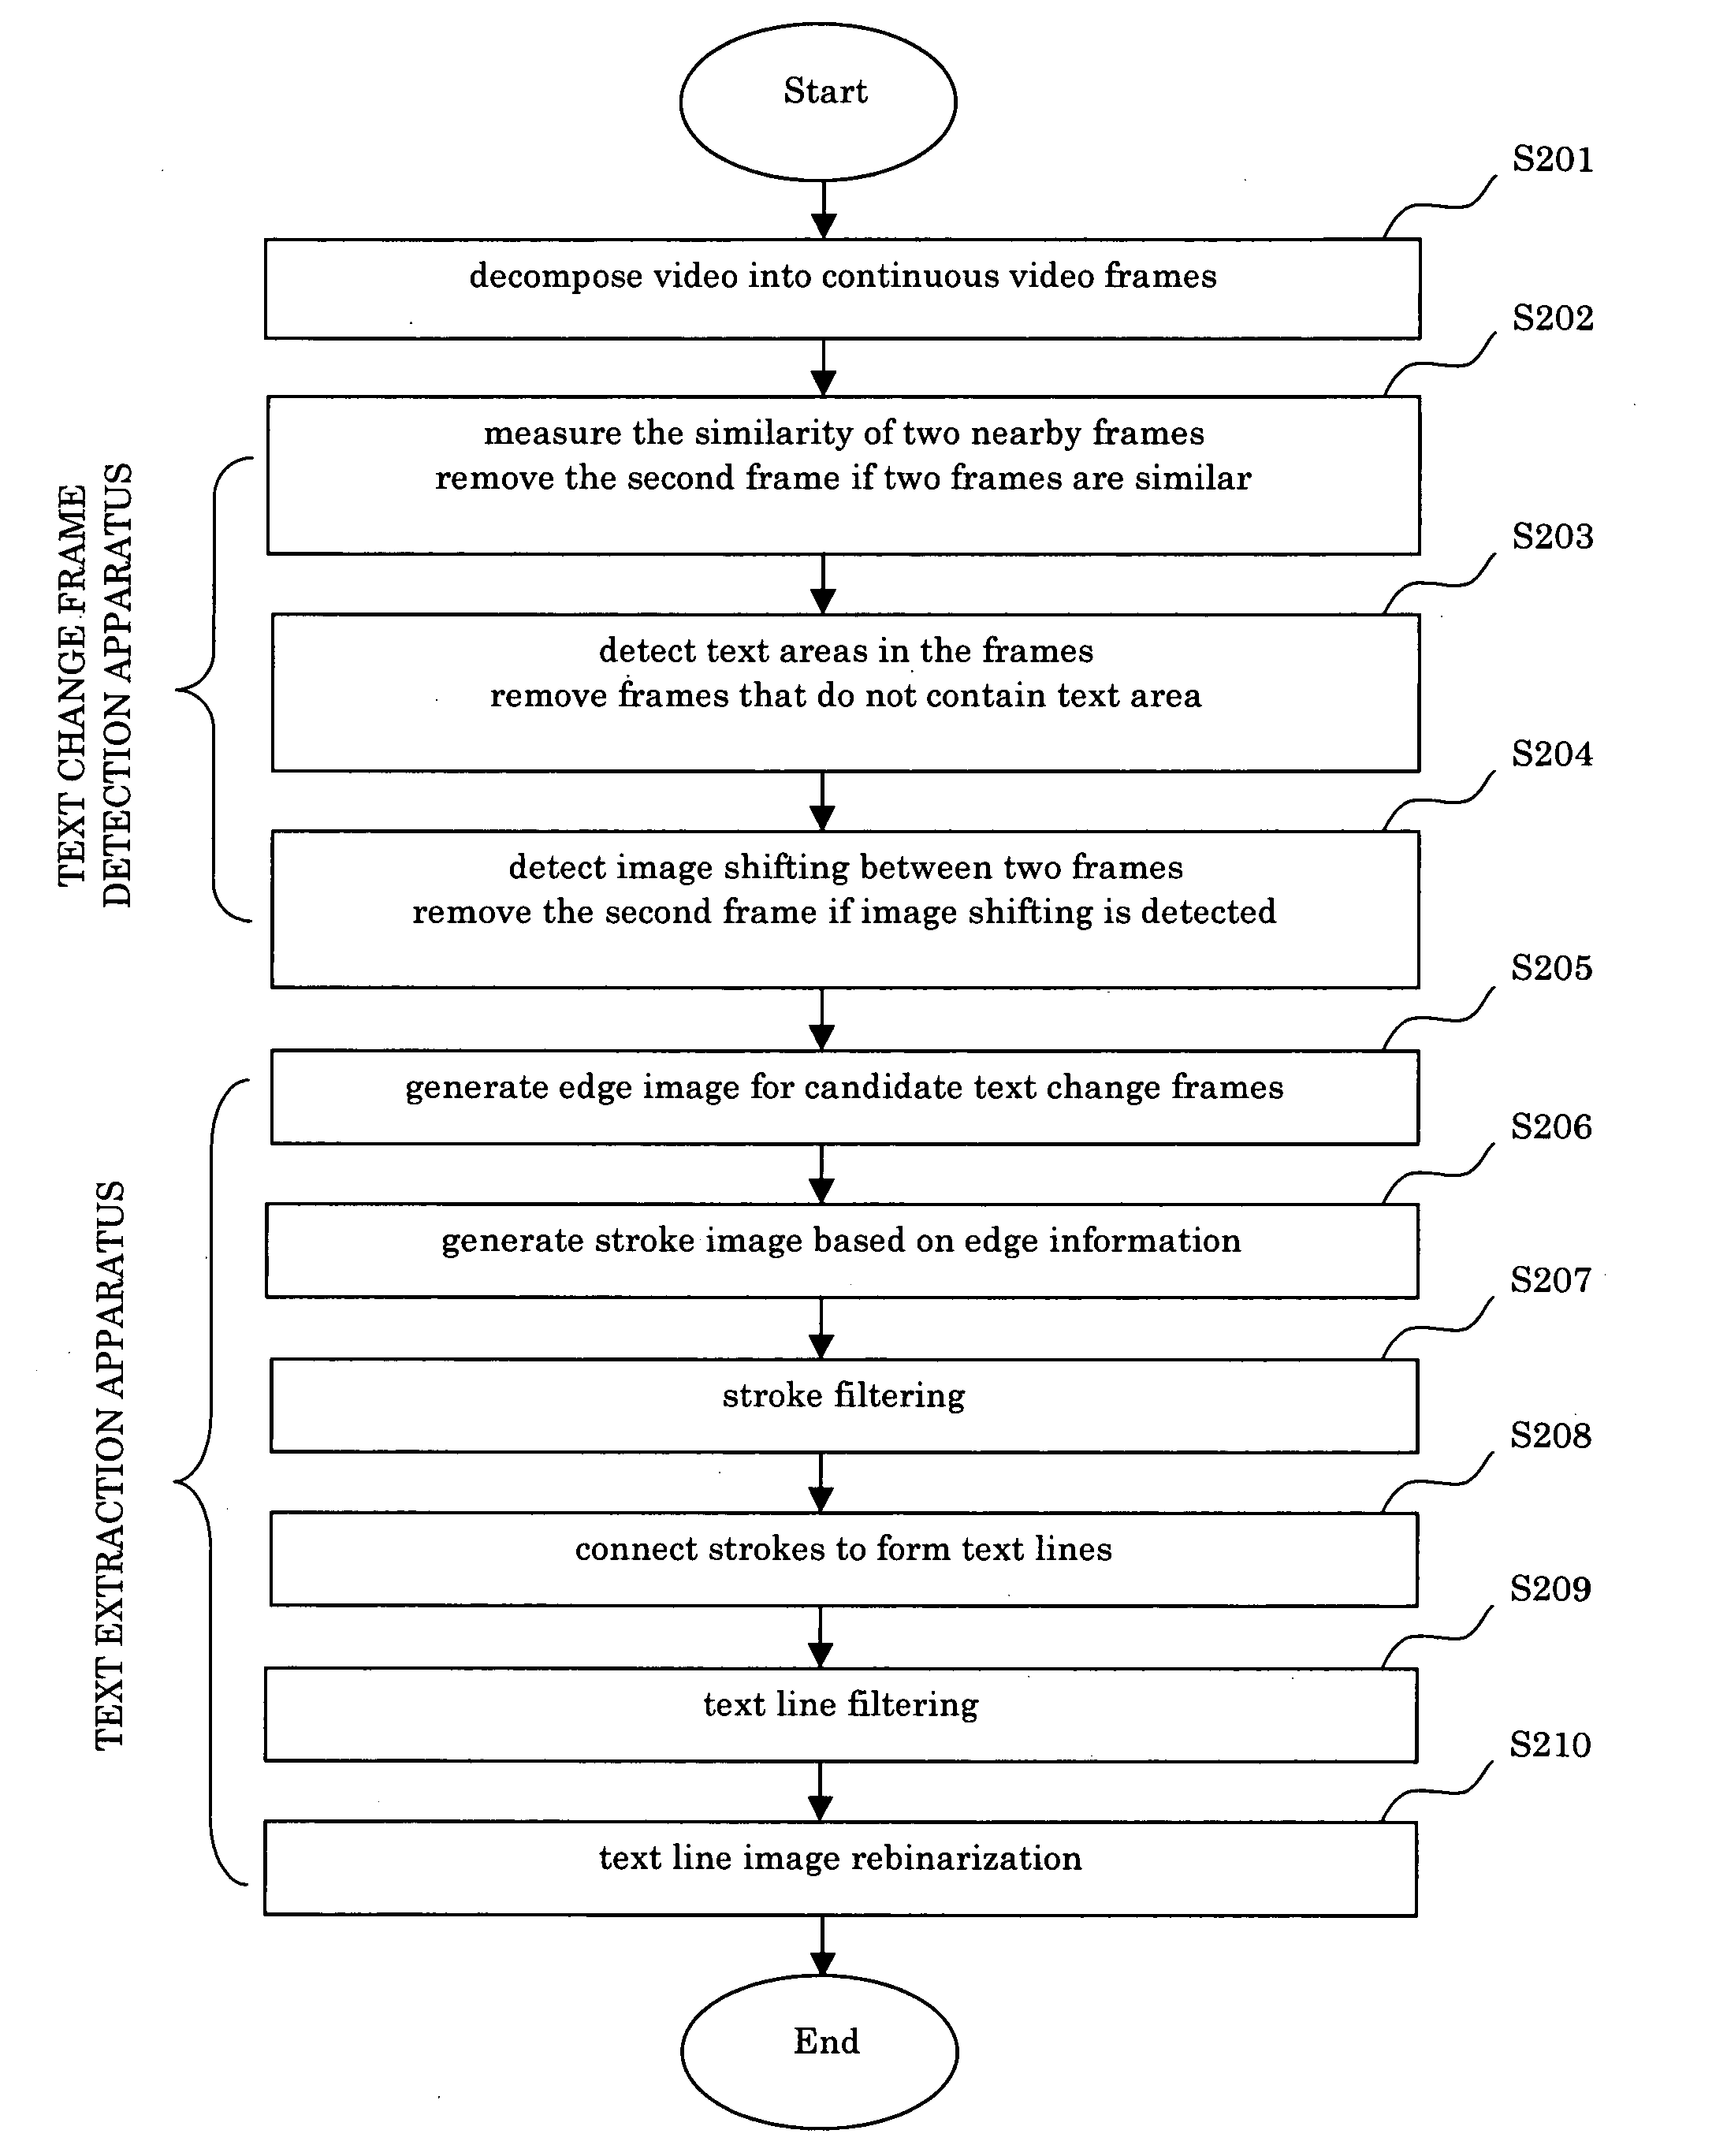 Video text processing apparatus